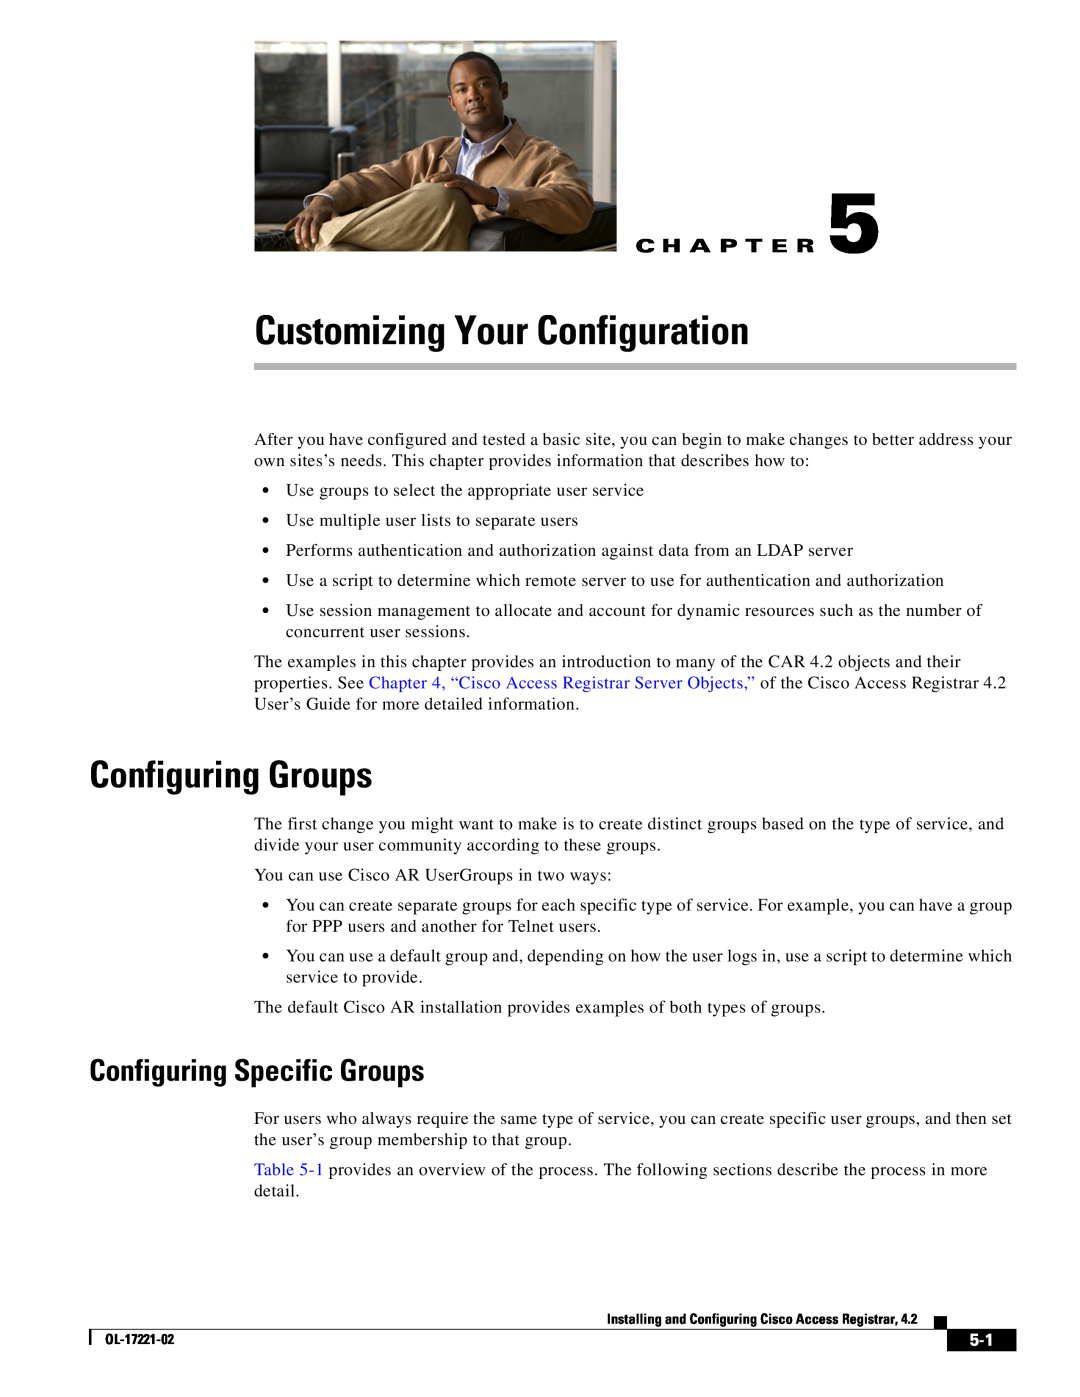 Cisco Systems 4.2 manual Customizing Your Configuration, Configuring Groups, Configuring Specific Groups, C H A P T E R 